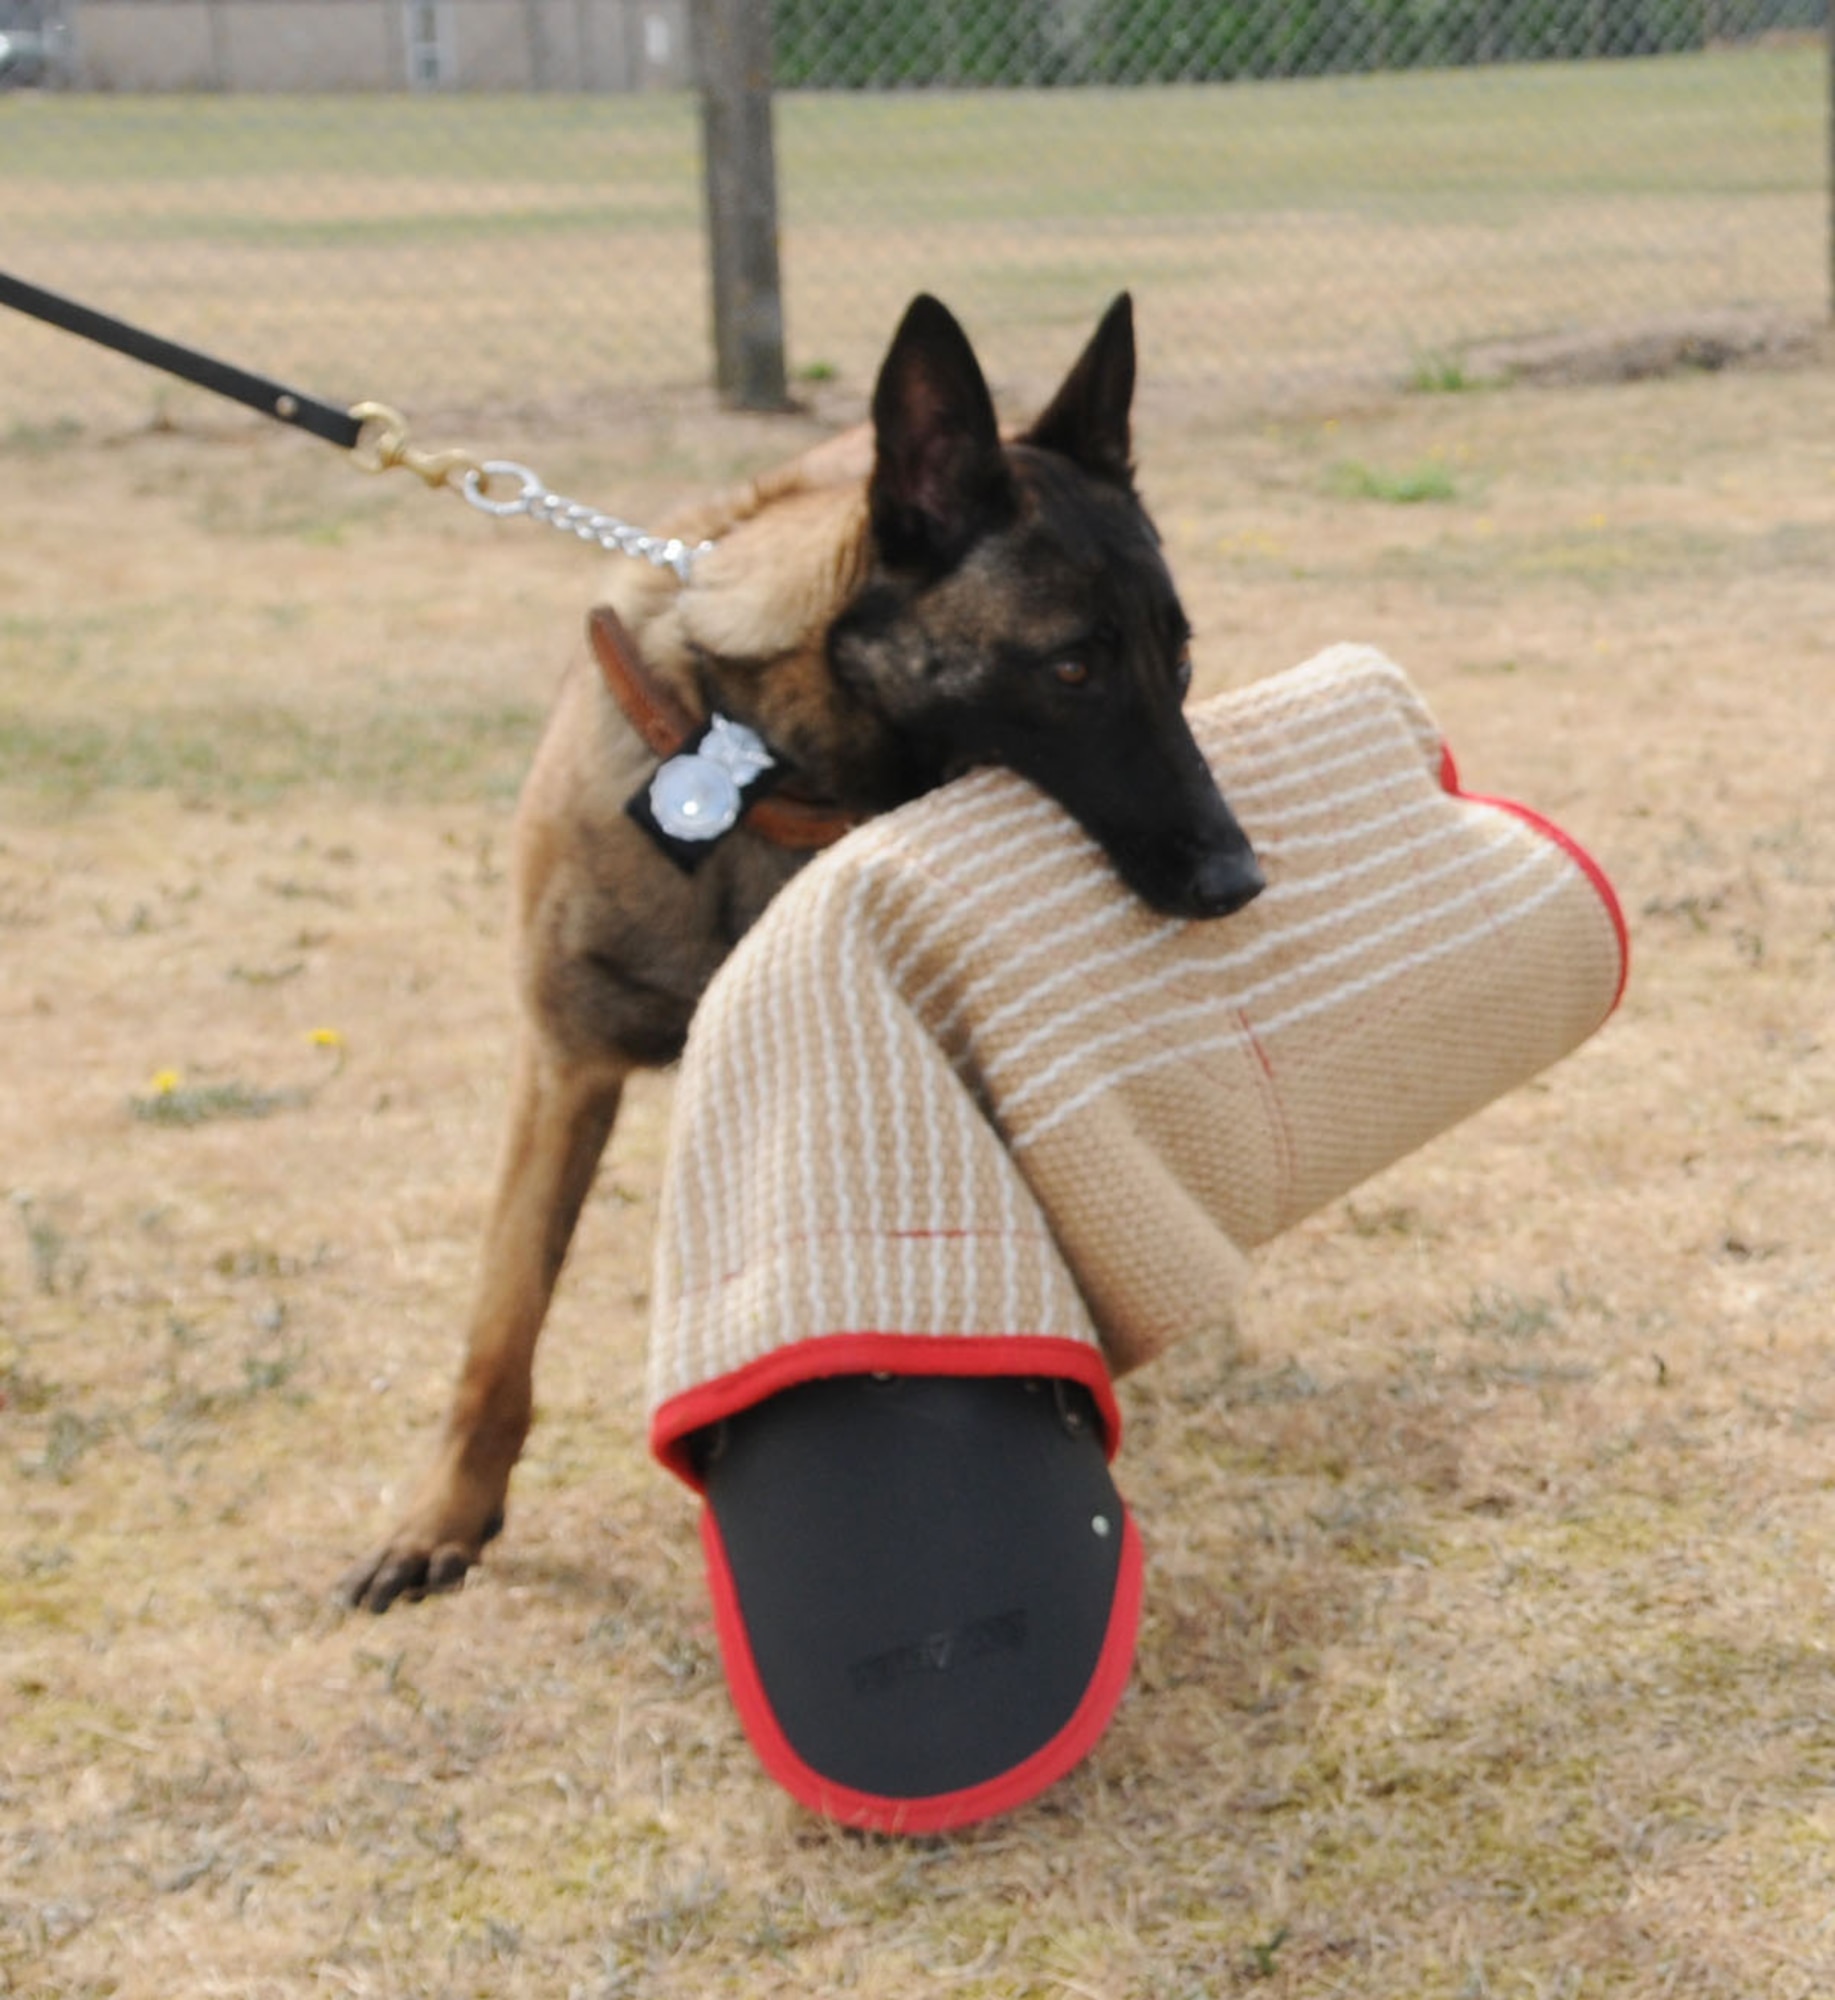 RAF MILDENHALL, England -- Military Working Dog Vvonya shows off her "trophy" which was her reward for successfully completing attack training. (U.S. Air Force photo/Karen Abeyasekere)